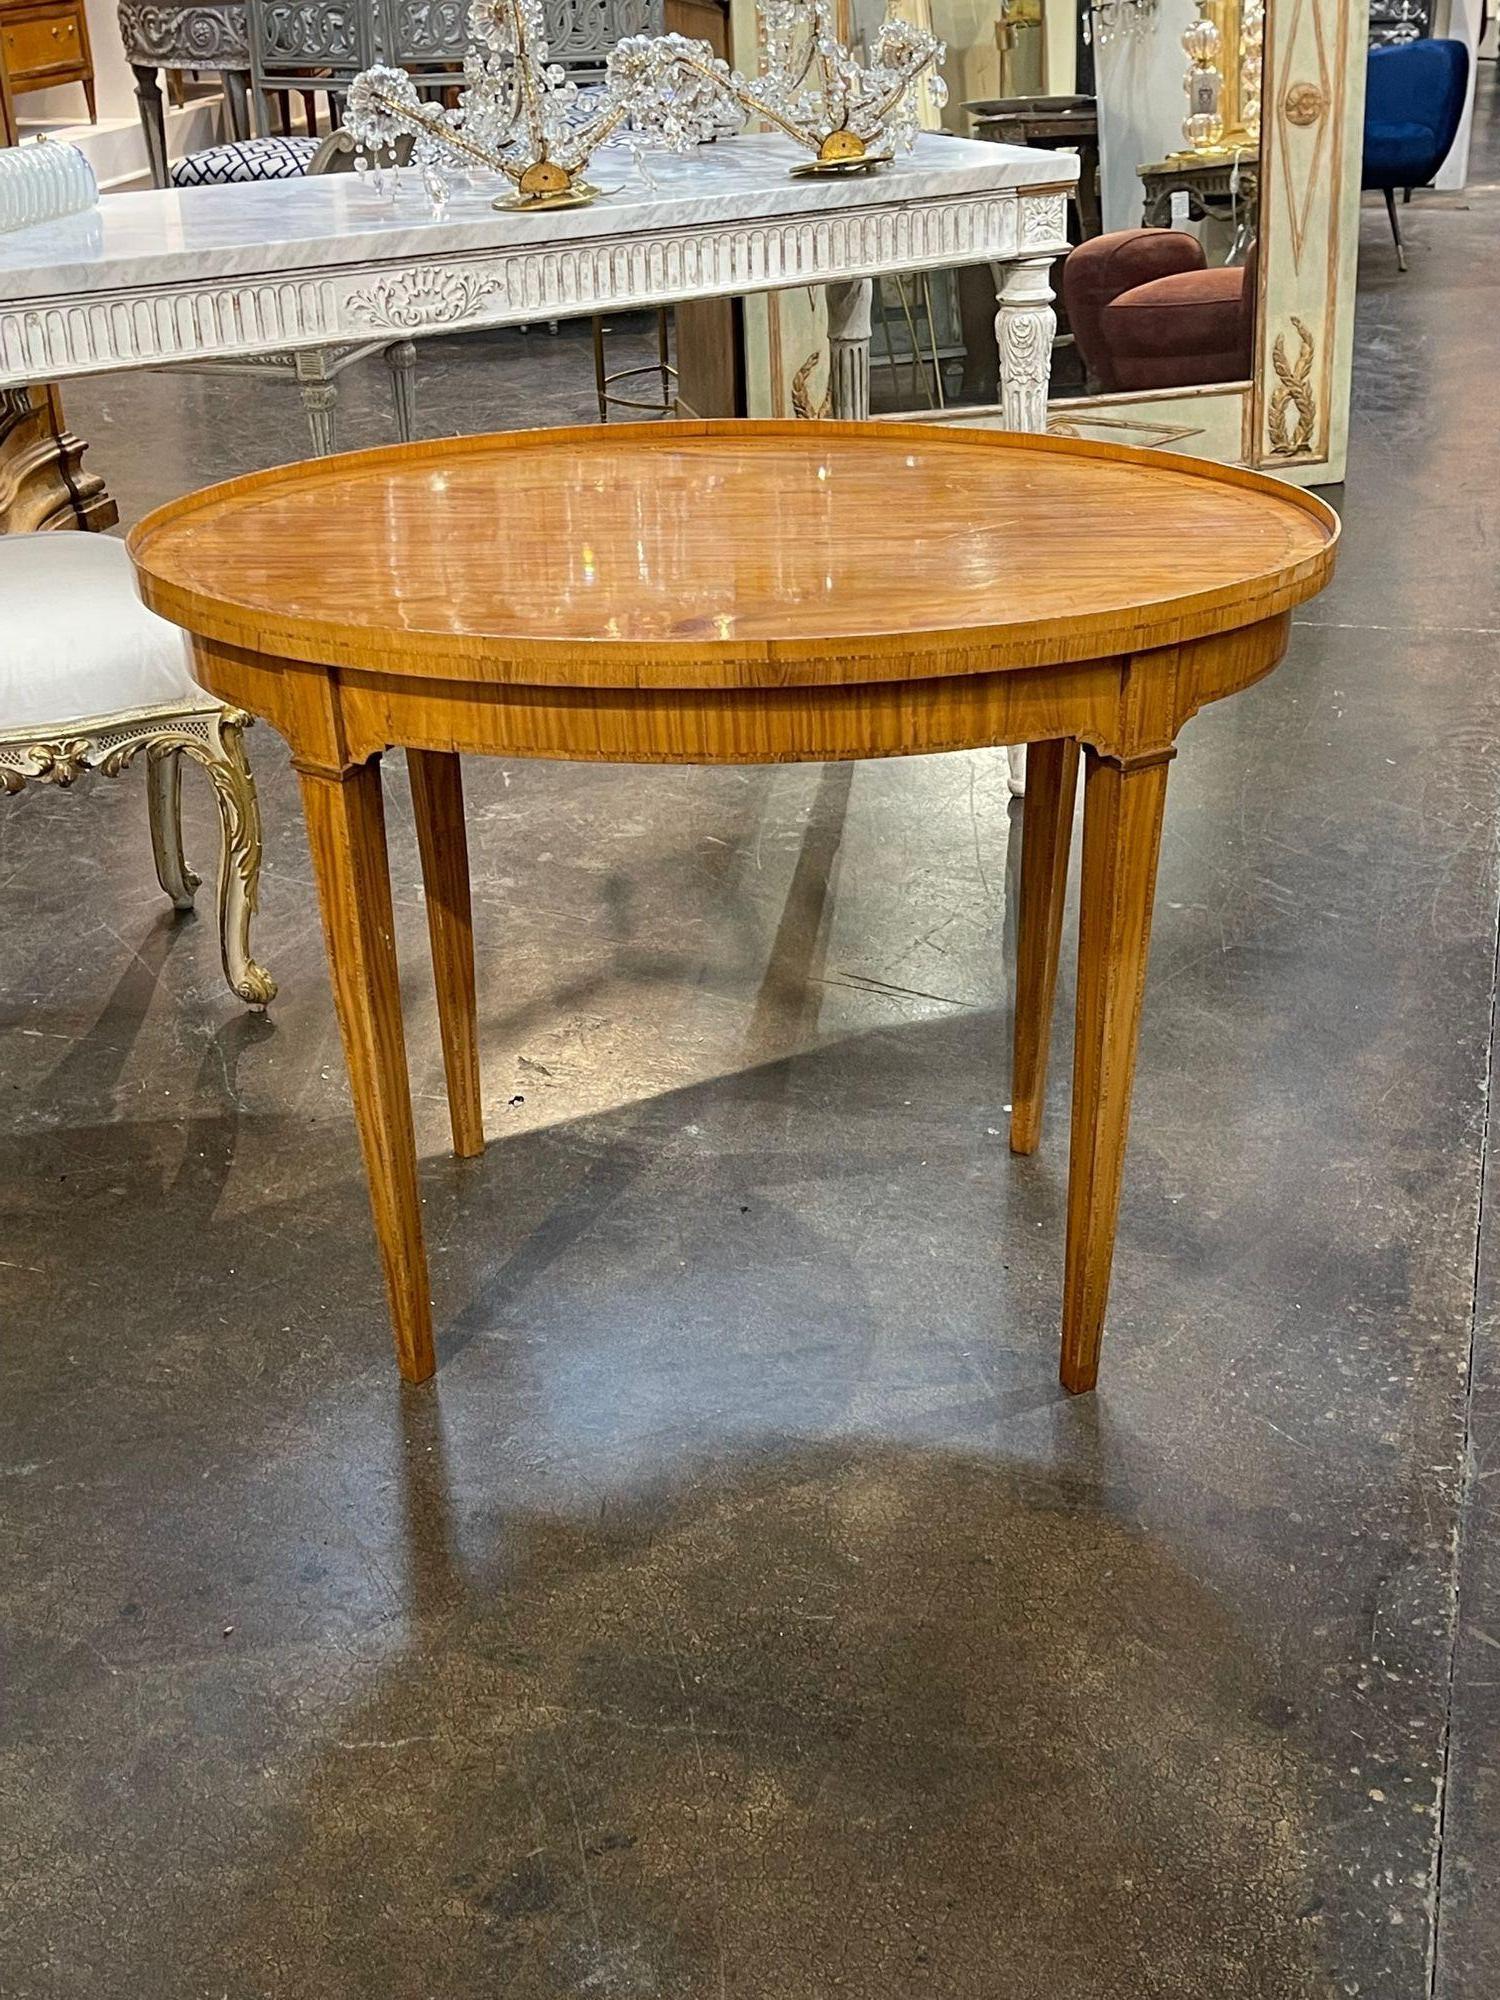 Handsome 19th century Italian oval walnut inlaid side table. Circa 1870. Perfect for today's transitional designs!.